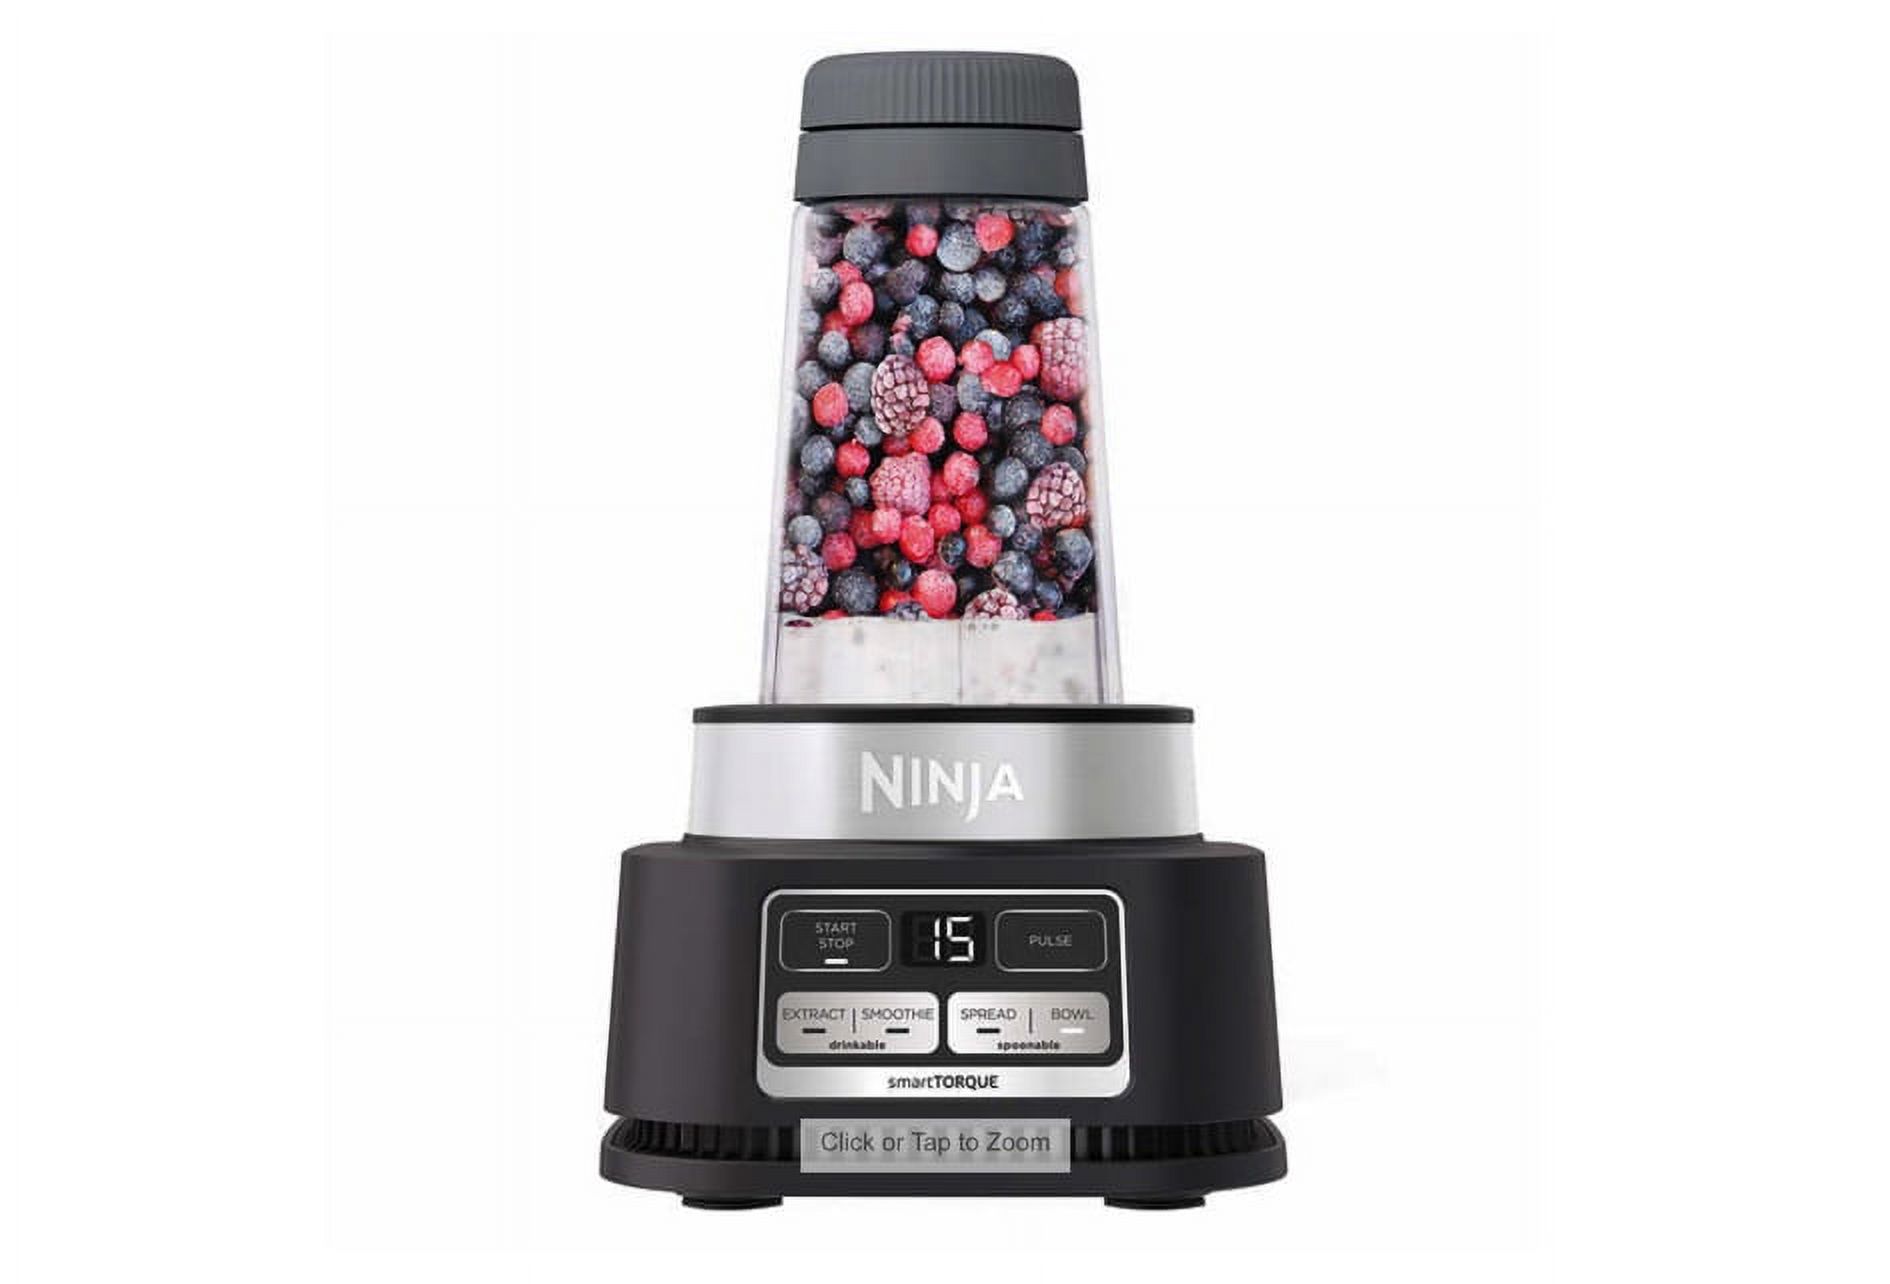 Ninja® Foodi® Smoothie Bowl Maker and Nutrient Extractor* 1200WP Personal Blender CO101B - image 4 of 7